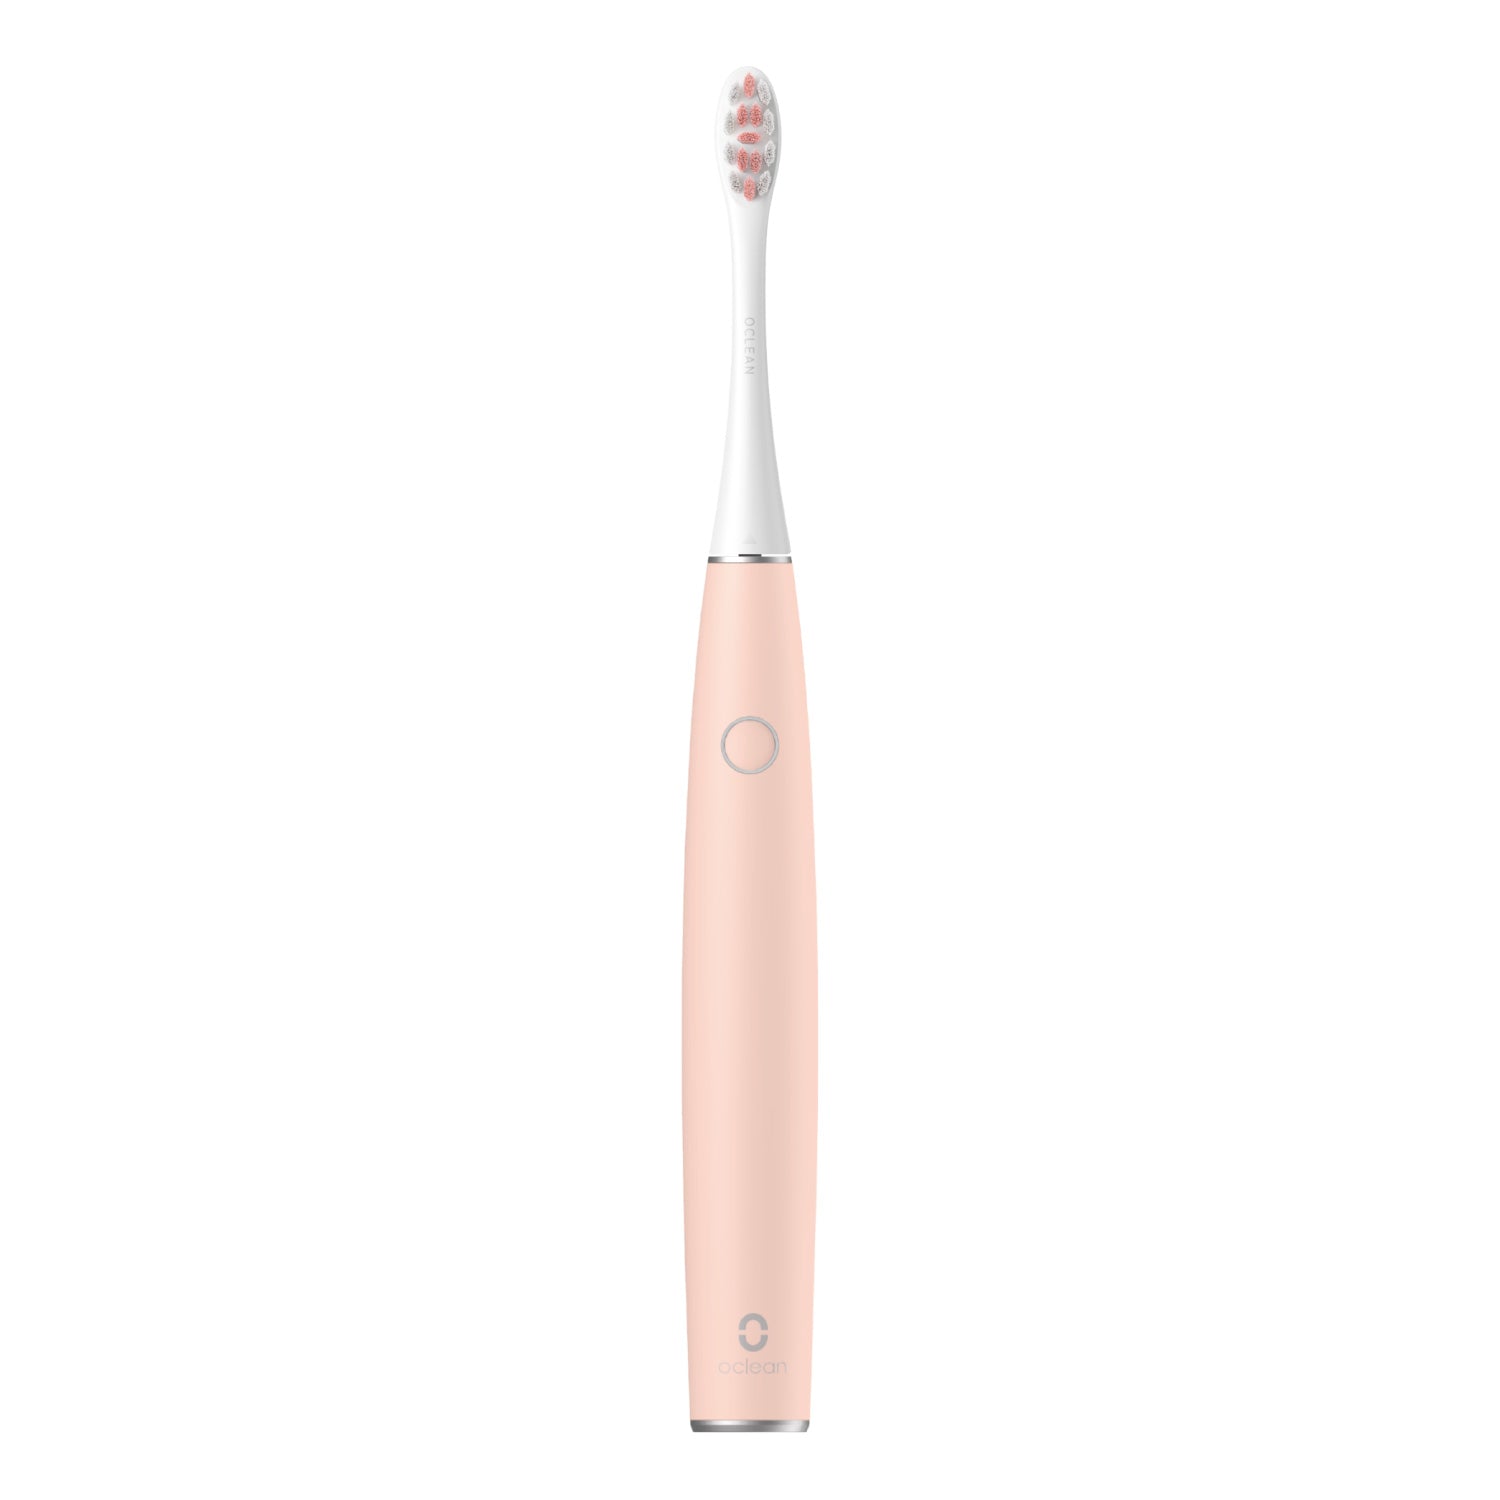 Oclean Air 2 Sonic Electric Toothbrush Toothbrushes Pink  Oclean Official